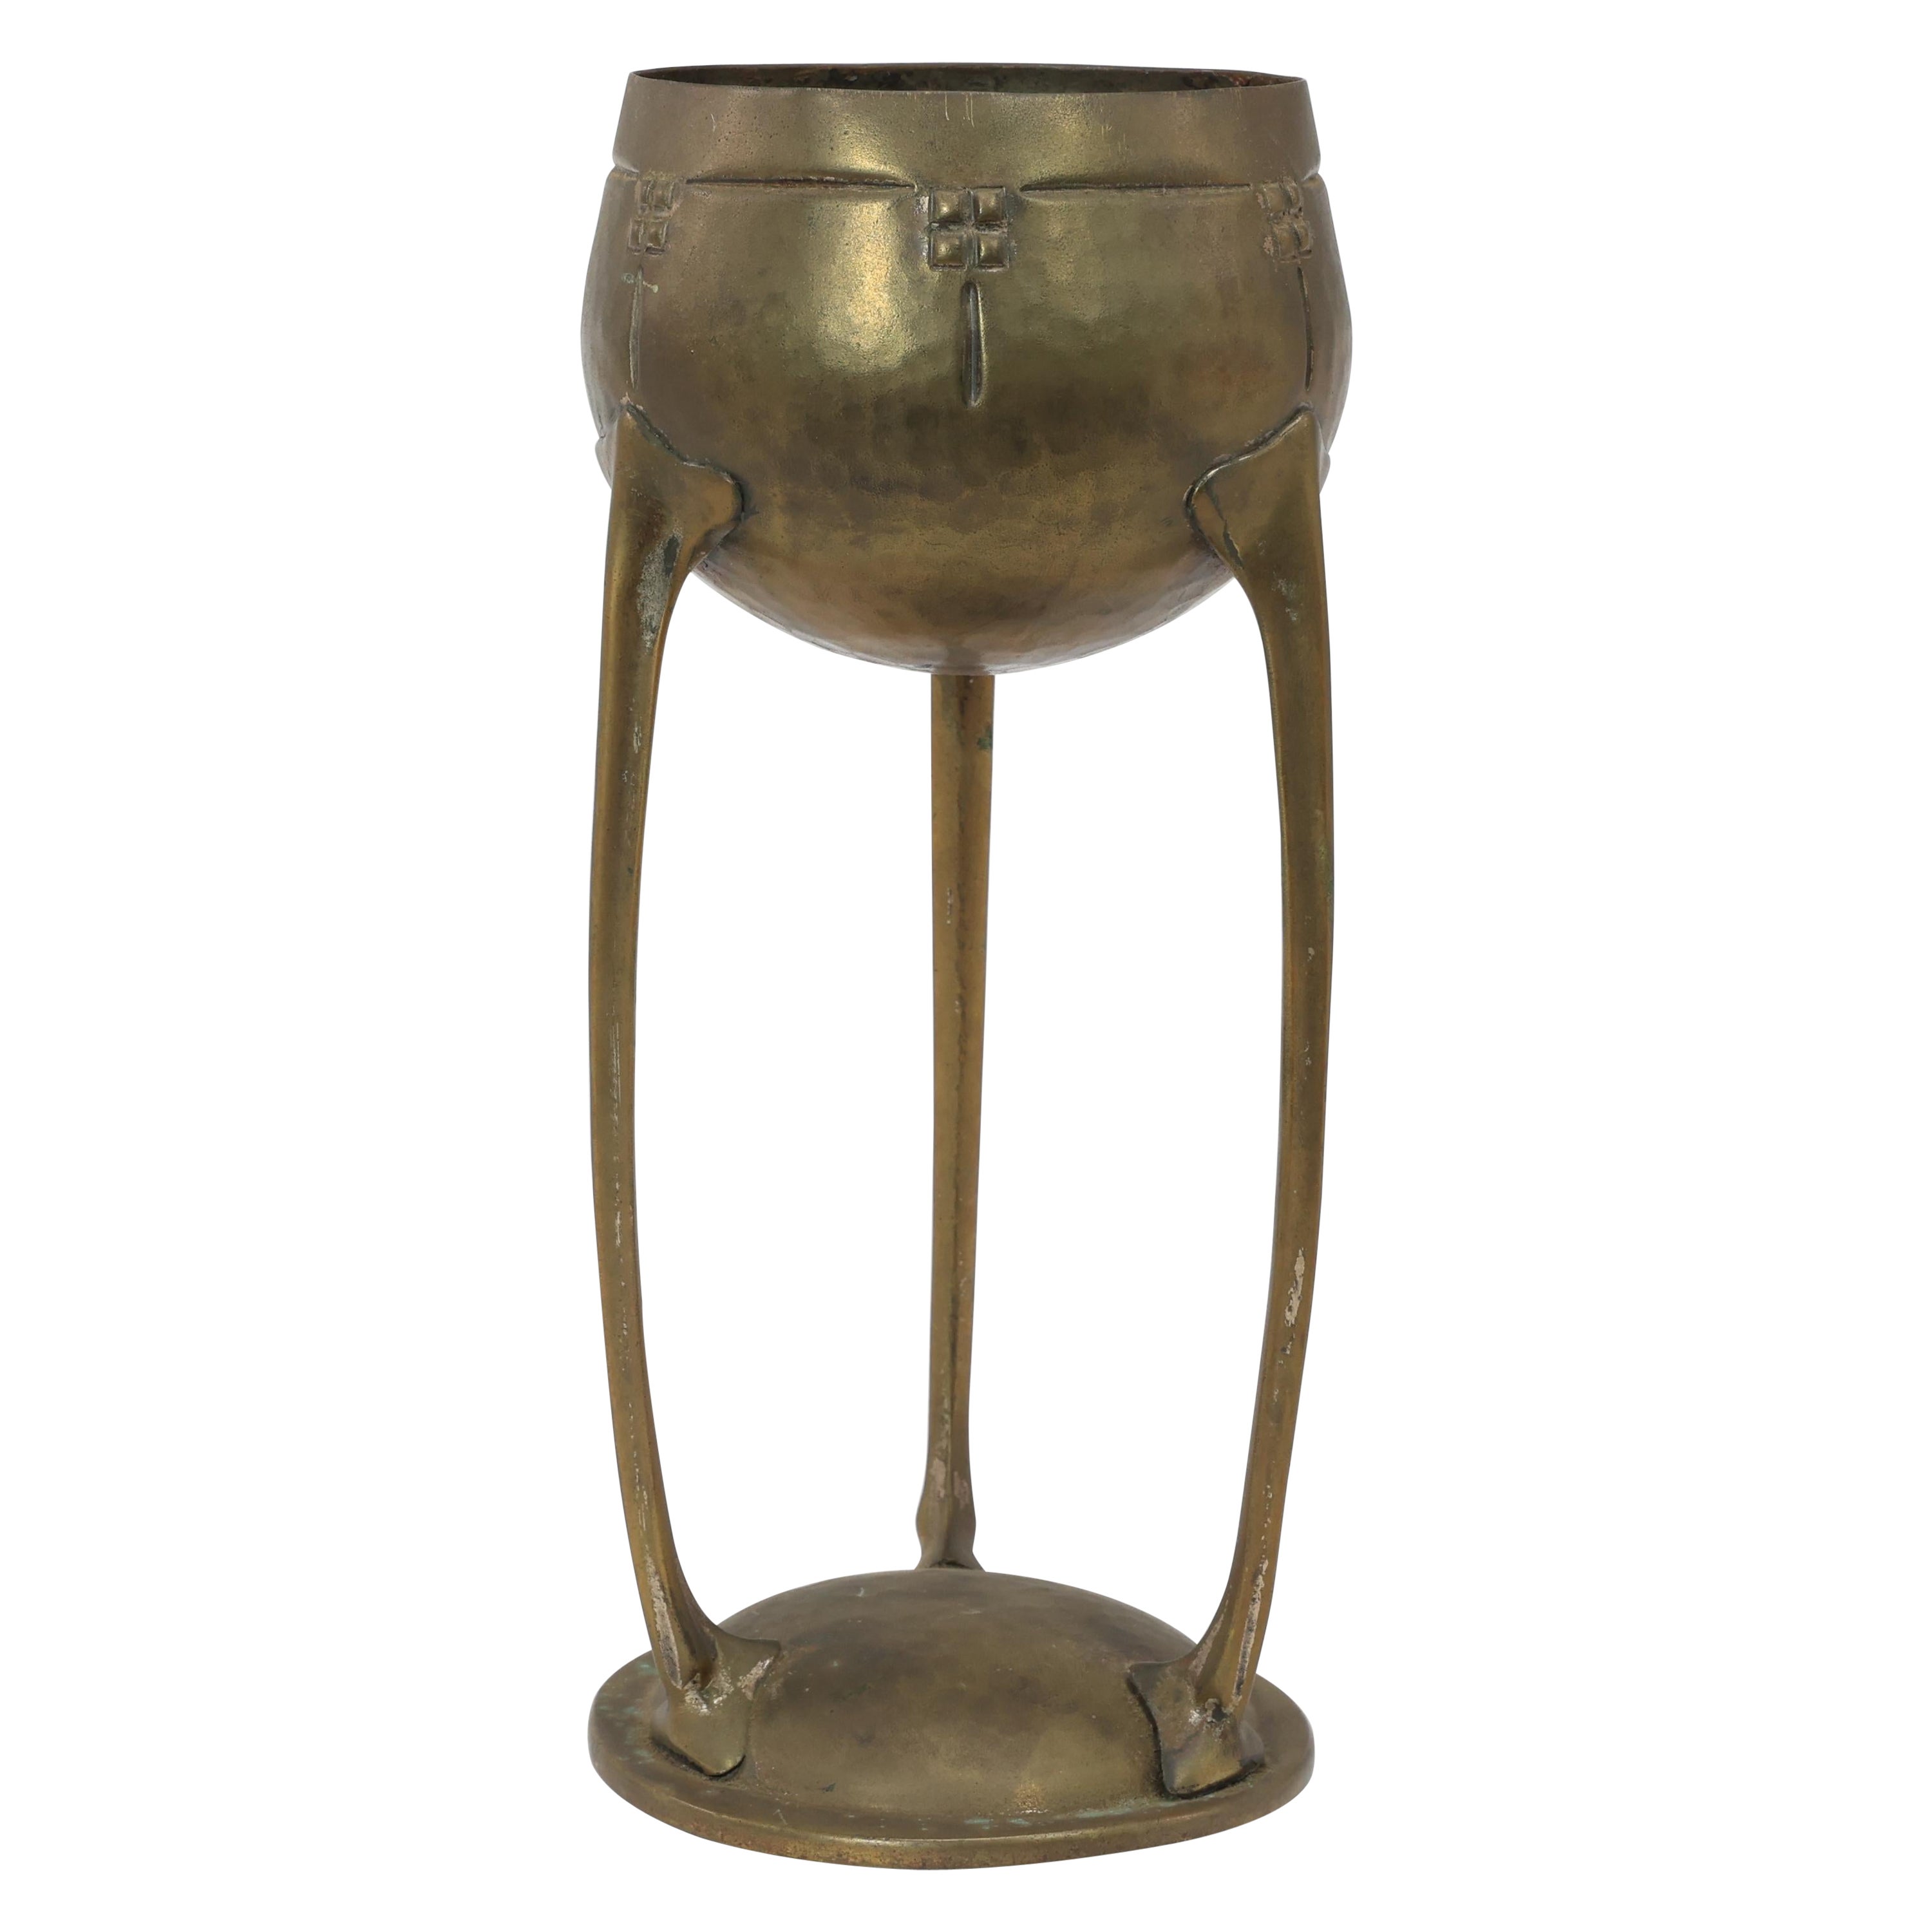 WMF. A hand beaten brass chalice, the bowl raised on three organic supports. For Sale